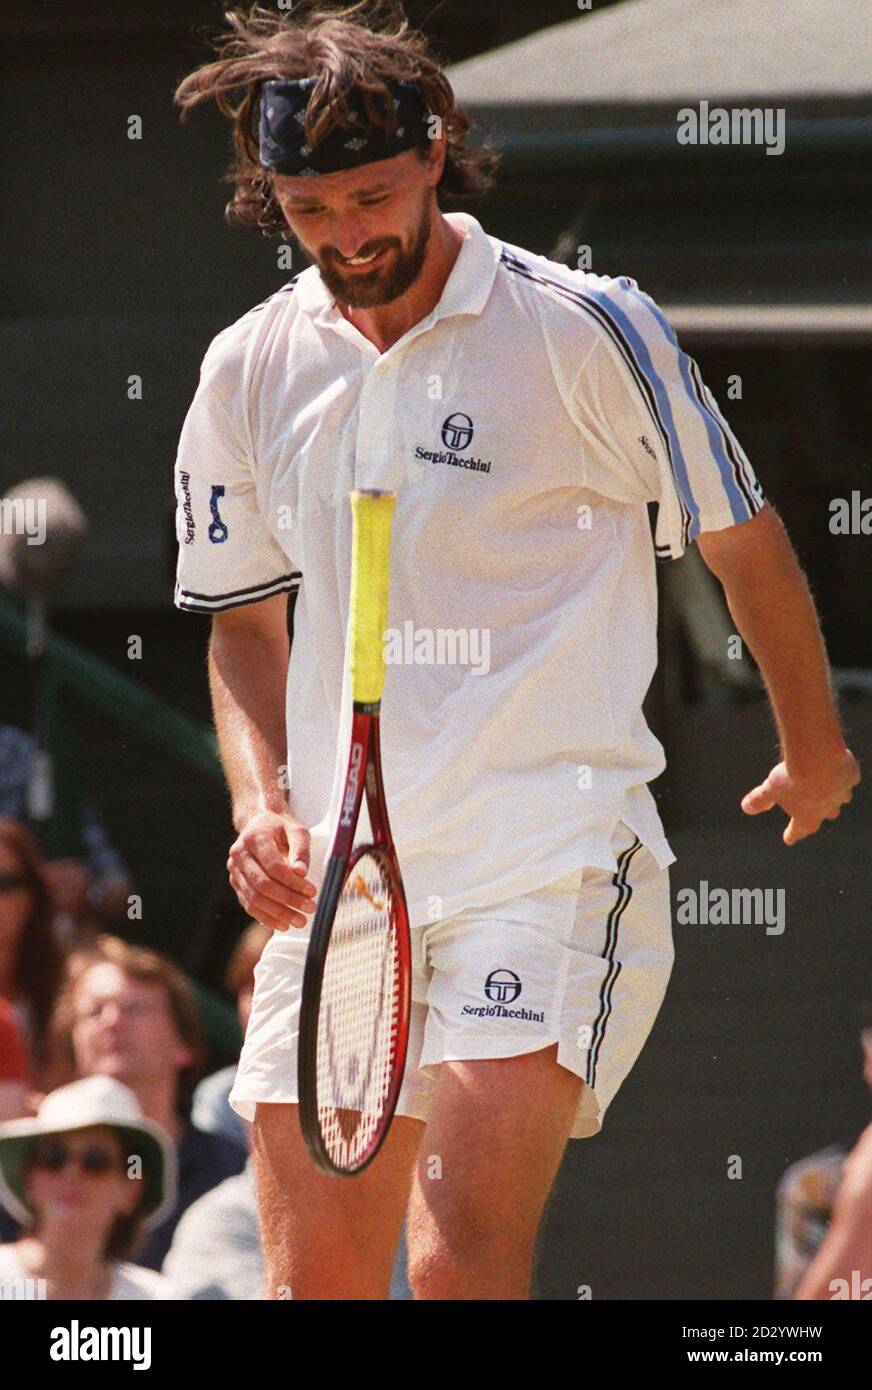 Pete Sampras celebrates after winning the mens final at Wimbledon today (Sunday) against Goran Ivanisevic, taking the match 6-7,7-6,6-4,3-6,6-2